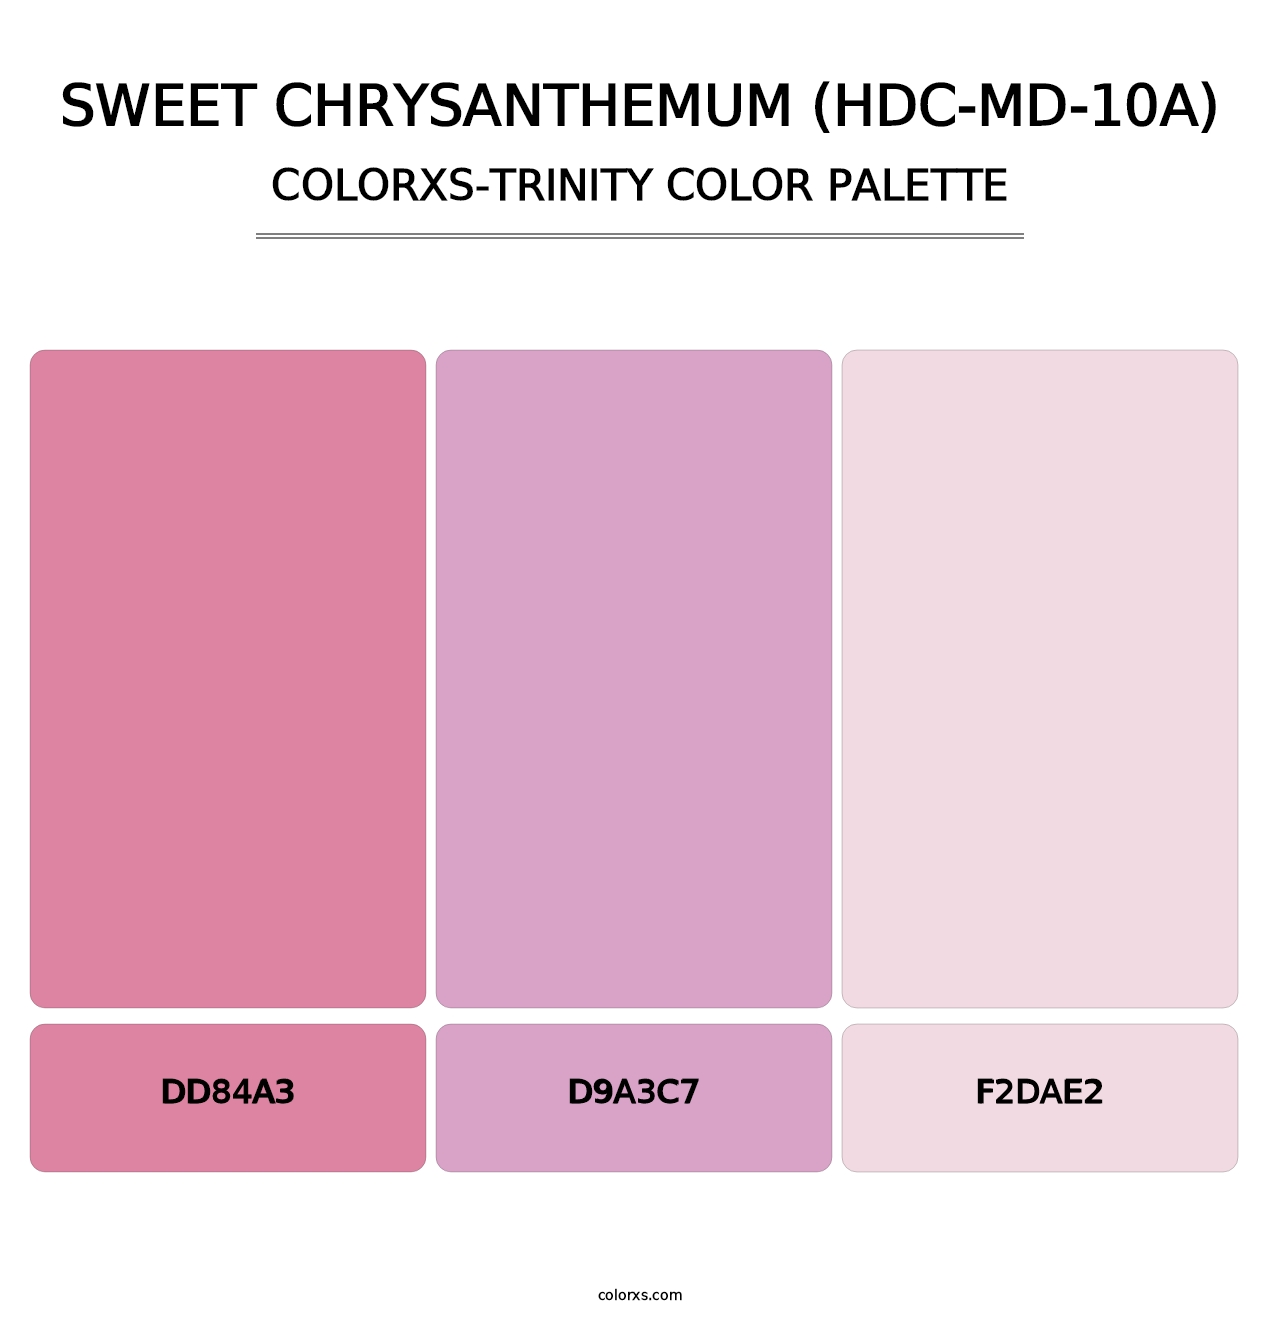 Sweet Chrysanthemum (HDC-MD-10A) - Colorxs Trinity Palette